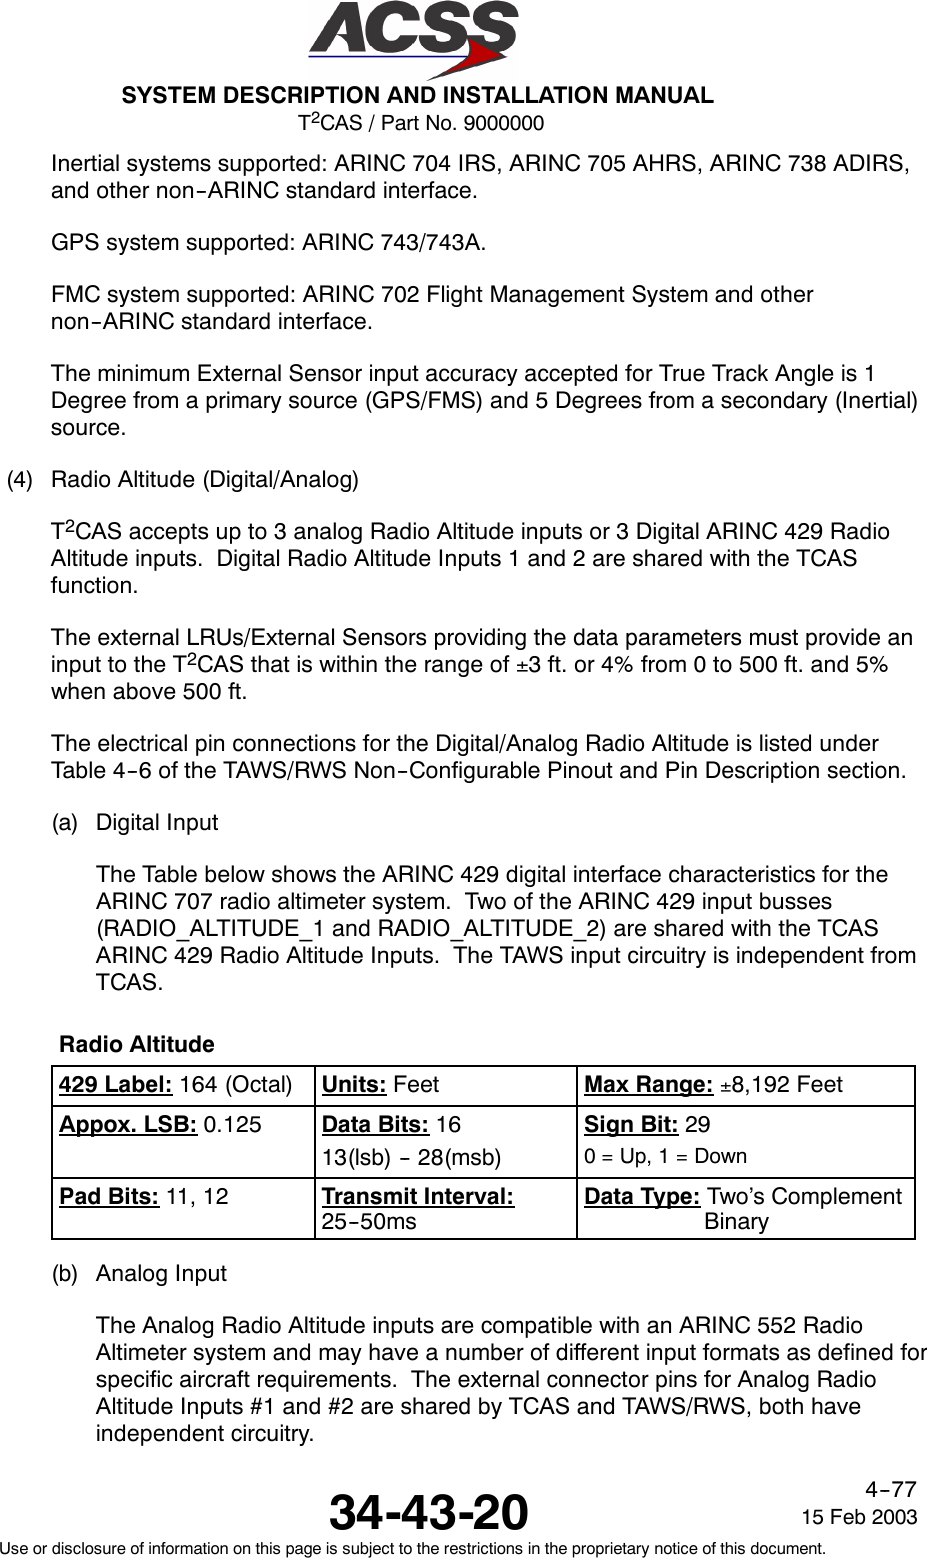 T2CAS / Part No. 9000000SYSTEM DESCRIPTION AND INSTALLATION MANUAL34-43-20 15 Feb 2003Use or disclosure of information on this page is subject to the restrictions in the proprietary notice of this document.4--77Inertial systems supported: ARINC 704 IRS, ARINC 705 AHRS, ARINC 738 ADIRS,and other non--ARINC standard interface.GPS system supported: ARINC 743/743A.FMC system supported: ARINC 702 Flight Management System and othernon--ARINC standard interface.The minimum External Sensor input accuracy accepted for True Track Angle is 1Degree from a primary source (GPS/FMS) and 5 Degrees from a secondary (Inertial)source.(4) Radio Altitude (Digital/Analog)T2CAS accepts up to 3 analog Radio Altitude inputs or 3 Digital ARINC 429 RadioAltitude inputs. Digital Radio Altitude Inputs 1 and 2 are shared with the TCASfunction.The external LRUs/External Sensors providing the data parameters must provide aninput to the T2CAS that is within the range of ±3 ft. or 4% from 0 to 500 ft. and 5%when above 500 ft.The electrical pin connections for the Digital/Analog Radio Altitude is listed underTable 4--6 of the TAWS/RWS Non--Configurable Pinout and Pin Description section.(a) Digital InputThe Table below shows the ARINC 429 digital interface characteristics for theARINC 707 radio altimeter system. Two of the ARINC 429 input busses(RADIO_ALTITUDE_1 and RADIO_ALTITUDE_2) are shared with the TCASARINC 429 Radio Altitude Inputs. The TAWS input circuitry is independent fromTCAS.Radio Altitude429 Label: 164 (Octal) Units: Feet Max Range: ±8,192 FeetAppox. LSB: 0.125 Data Bits: 1613(lsb) -- 28(msb)Sign Bit: 290=Up,1=DownPad Bits: 11, 12 Transmit Interval:25--50msData Type: Two’s ComplementBinary(b) Analog InputThe Analog Radio Altitude inputs are compatible with an ARINC 552 RadioAltimeter system and may have a number of different input formats as defined forspecific aircraft requirements. The external connector pins for Analog RadioAltitude Inputs #1 and #2 are shared by TCAS and TAWS/RWS, both haveindependent circuitry.